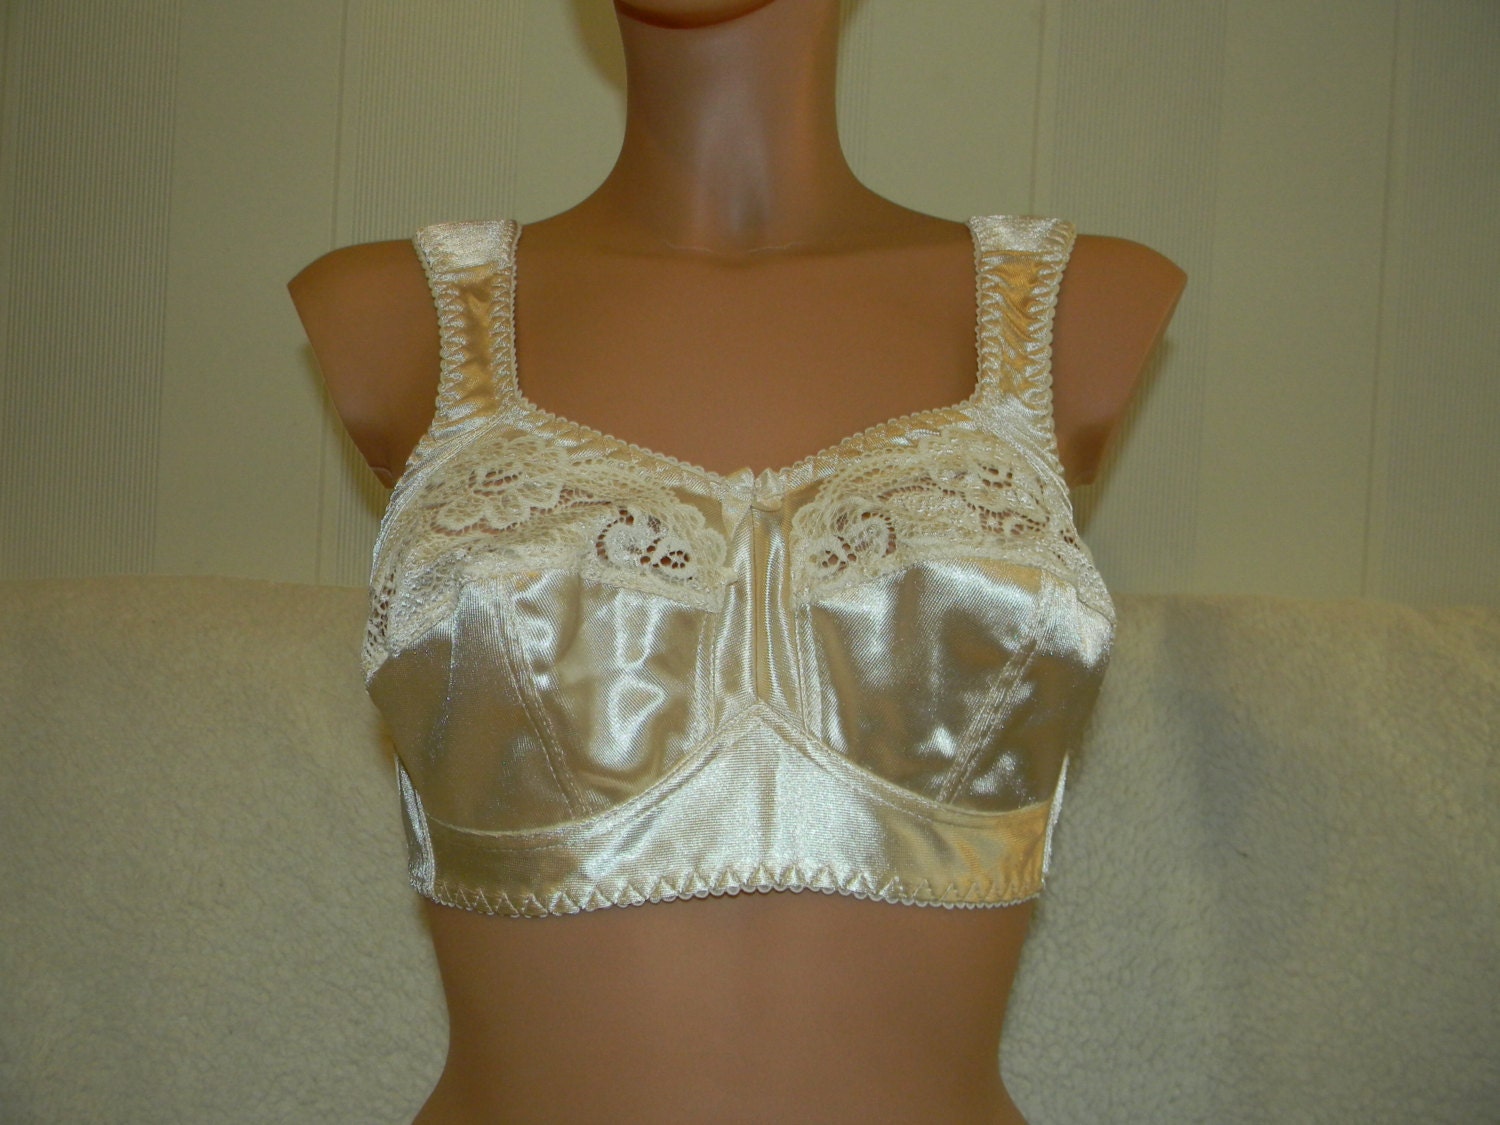 Vintage 1980s French Bra and Panties Set by Prima Donna, off White, Size FR  95c,uk,36c, Eu, 80C, Panties Size Eu 38,fr38, UK Small 